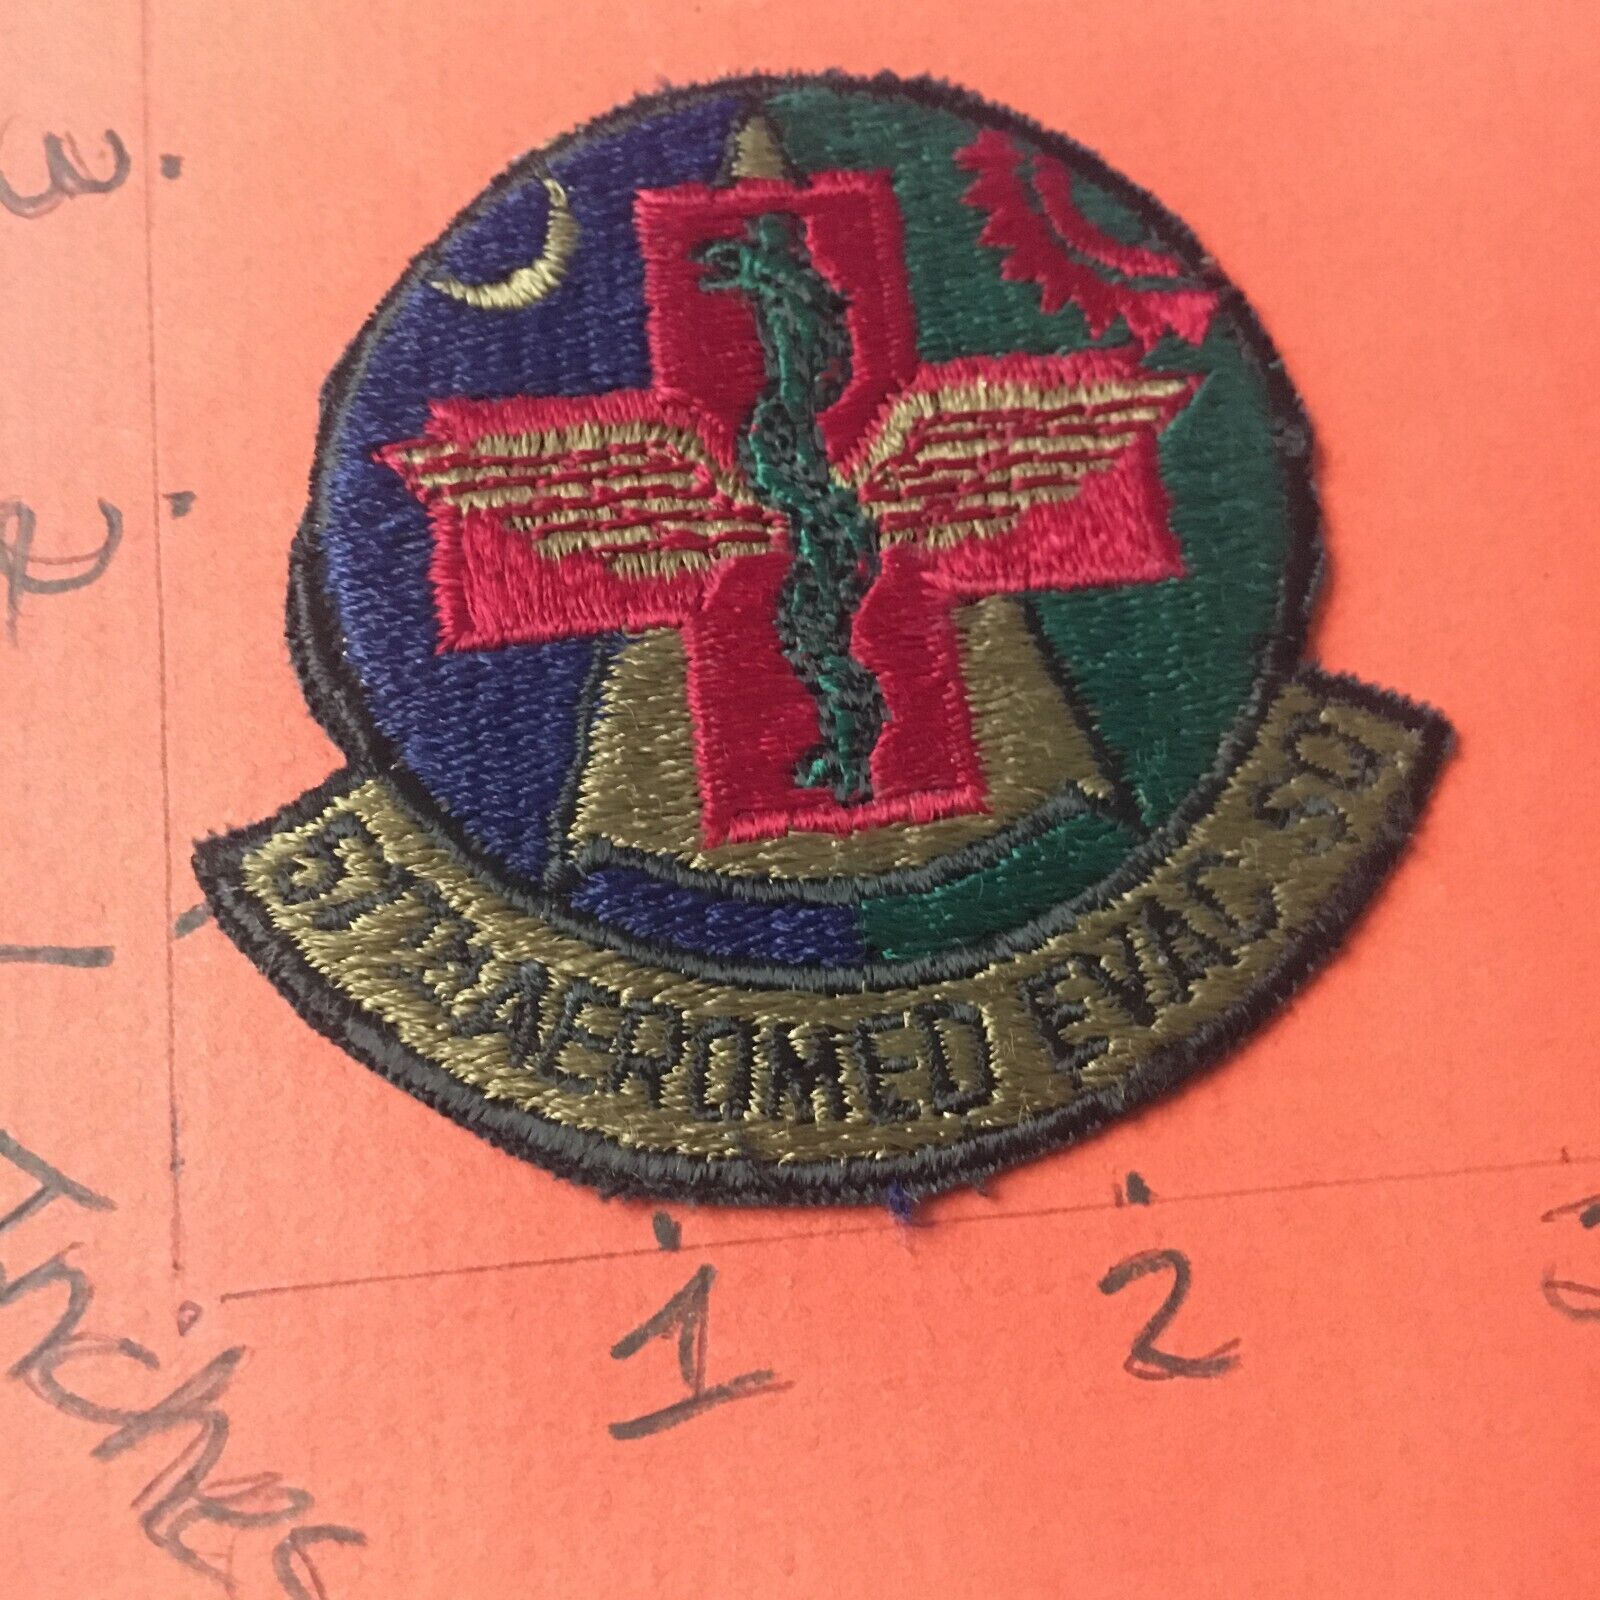 USAF 57th Aeromed Evac Squadron subdued Patch 4/23